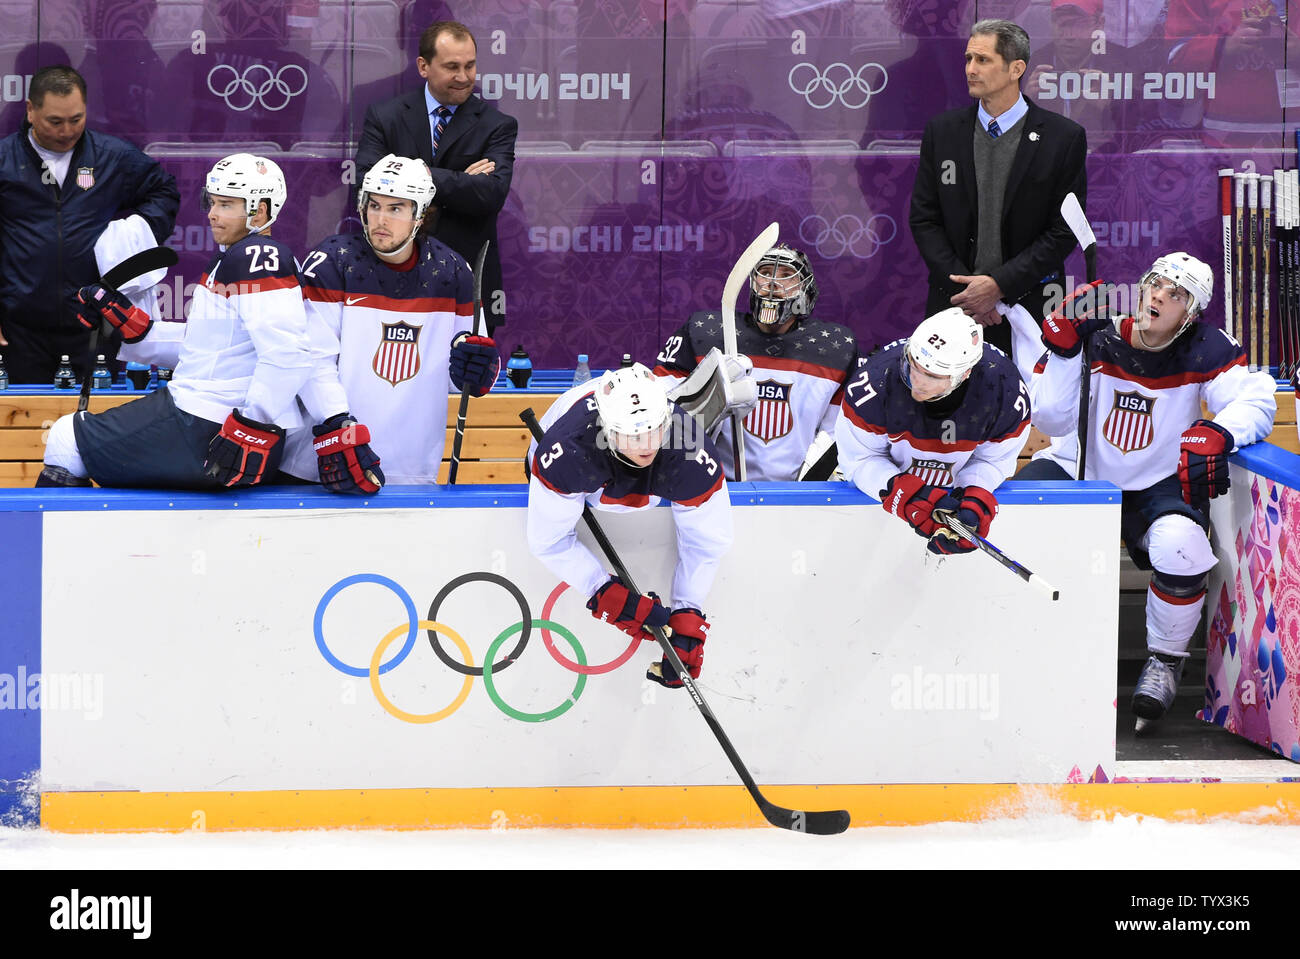 USA's Dustin Brown (23), Justin Faulk (72), Cam Fowler (3), Jonathan Quick (32), Ryan McDonagh (27) and USA's John Carlson (4) watch Canada celebration at the end of their game during the hockey play-offs semifinals at the Sochi 2014 Winter Olympics on February 21, 2014 in Sochi, Russia.  Canada defeated USA 1-0 to advance to the gold medal game against Sweden.  USA will play Finland for the bronze.  UPI/Molly Riley Stock Photo